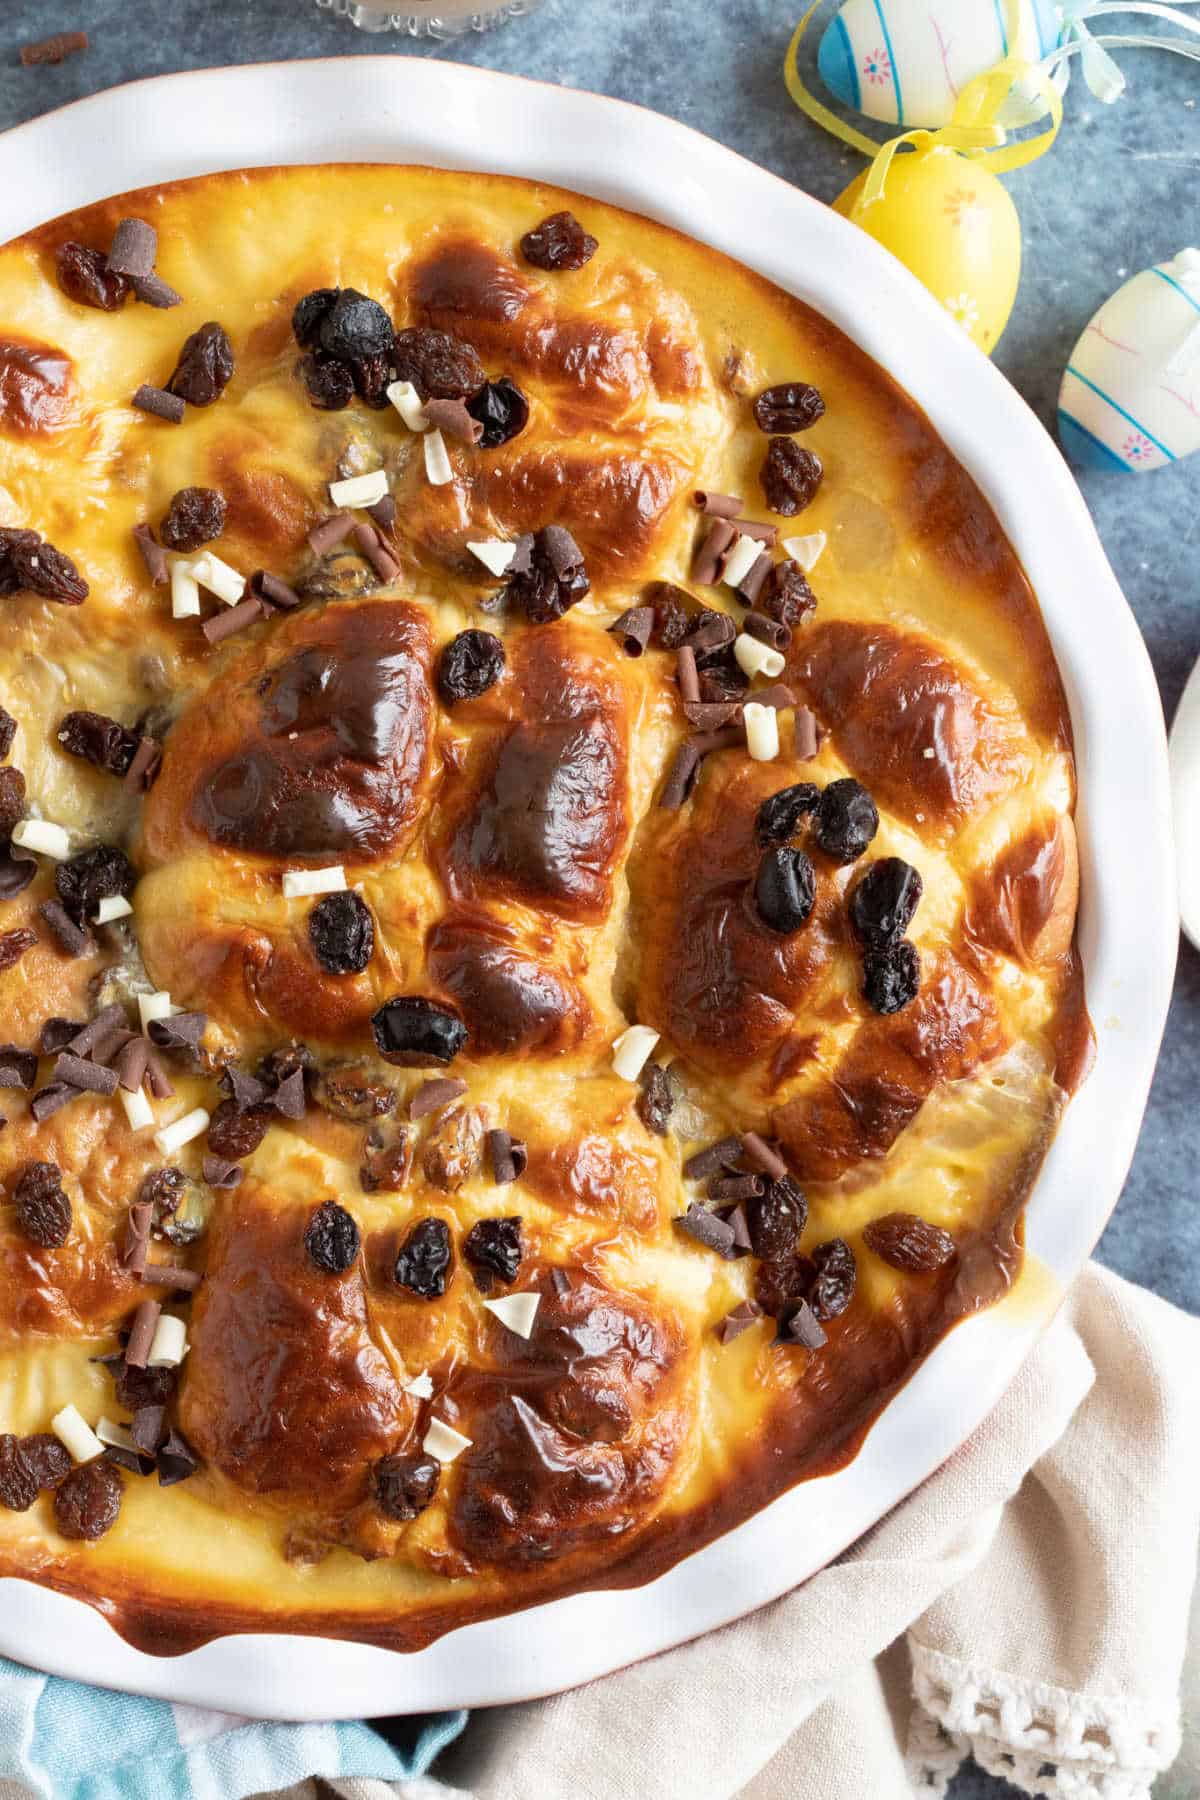 Hot cross bun bread and butter pudding in a baking dish.